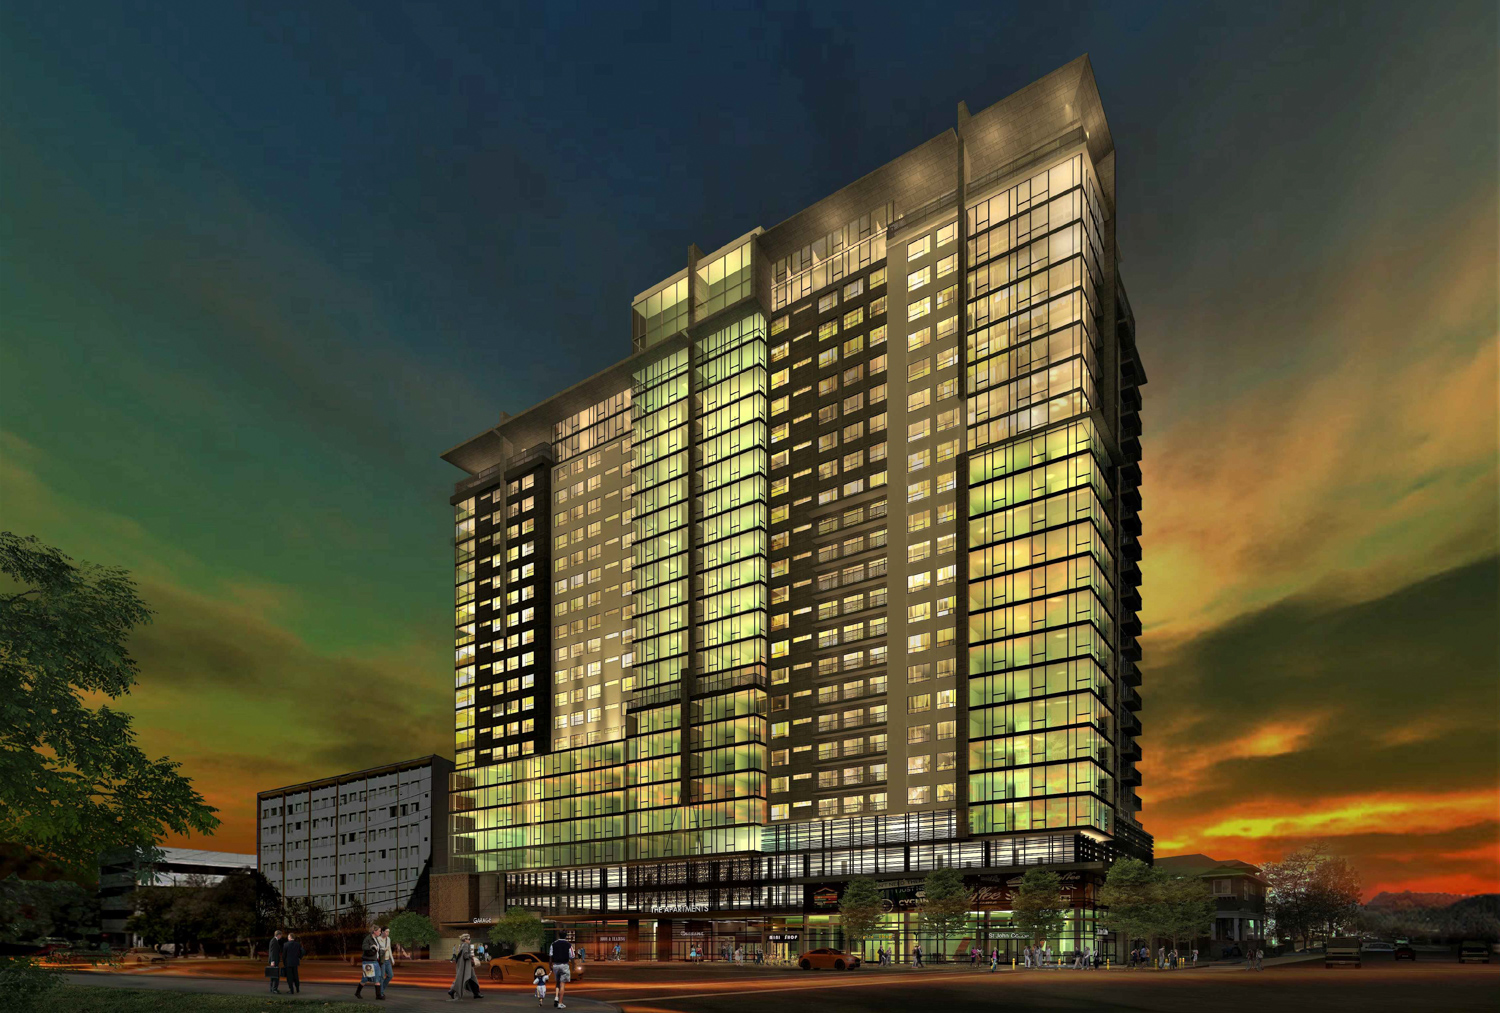 Student Housing at 100 North 4th Street evening view, rendering by LPMD Architects